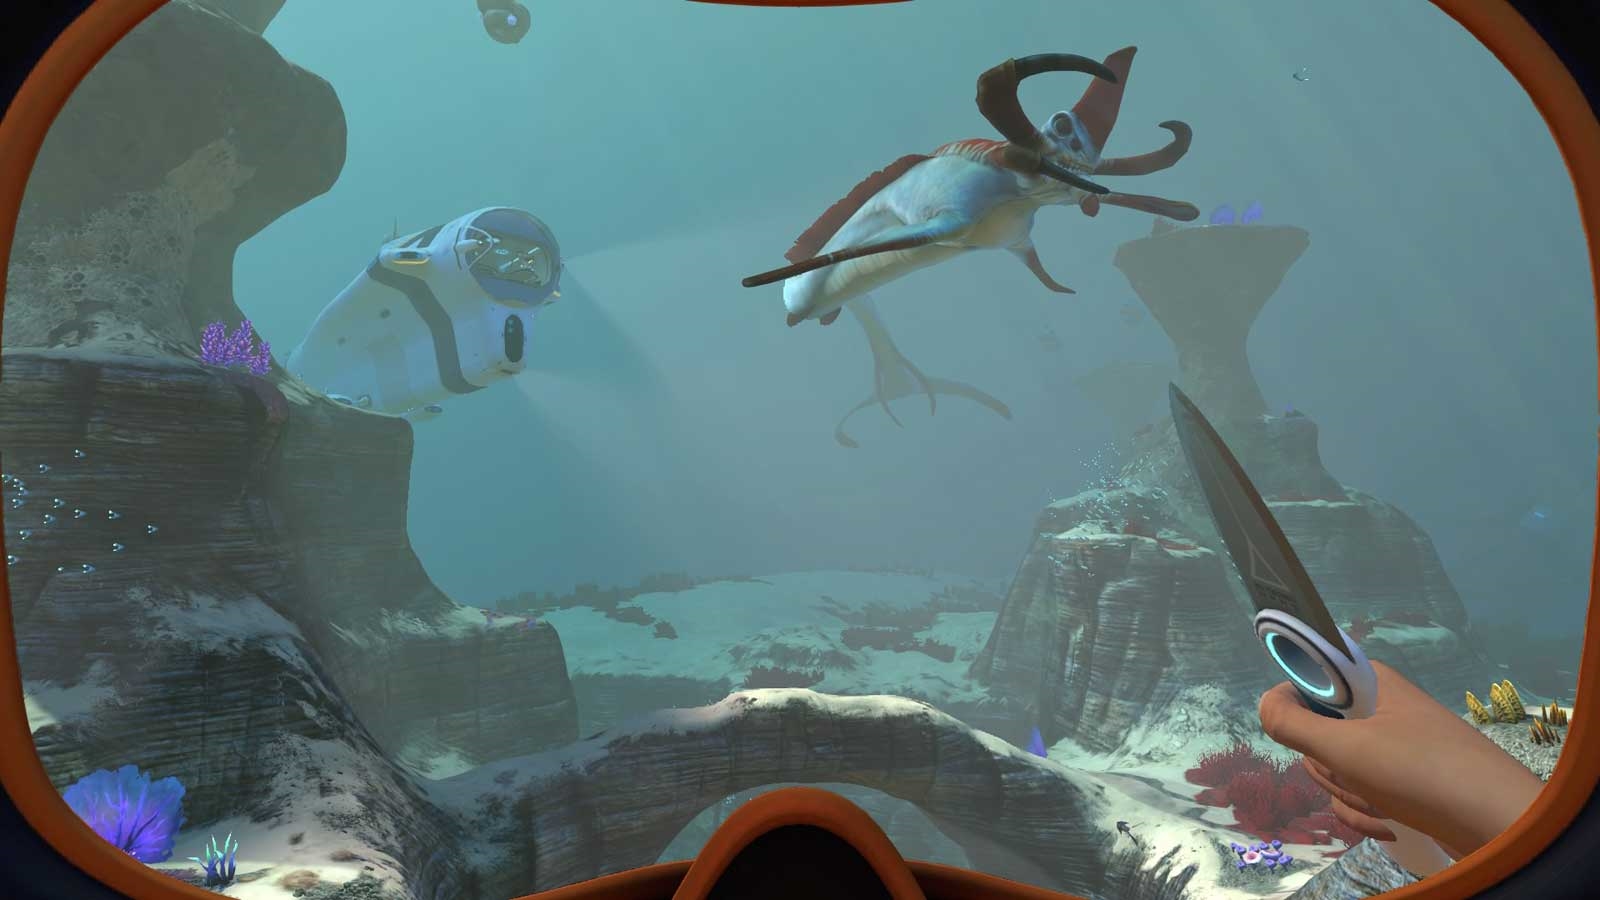 Undersea survival game 'Subnautica' hits PS4 this holiday season | DeviceDaily.com